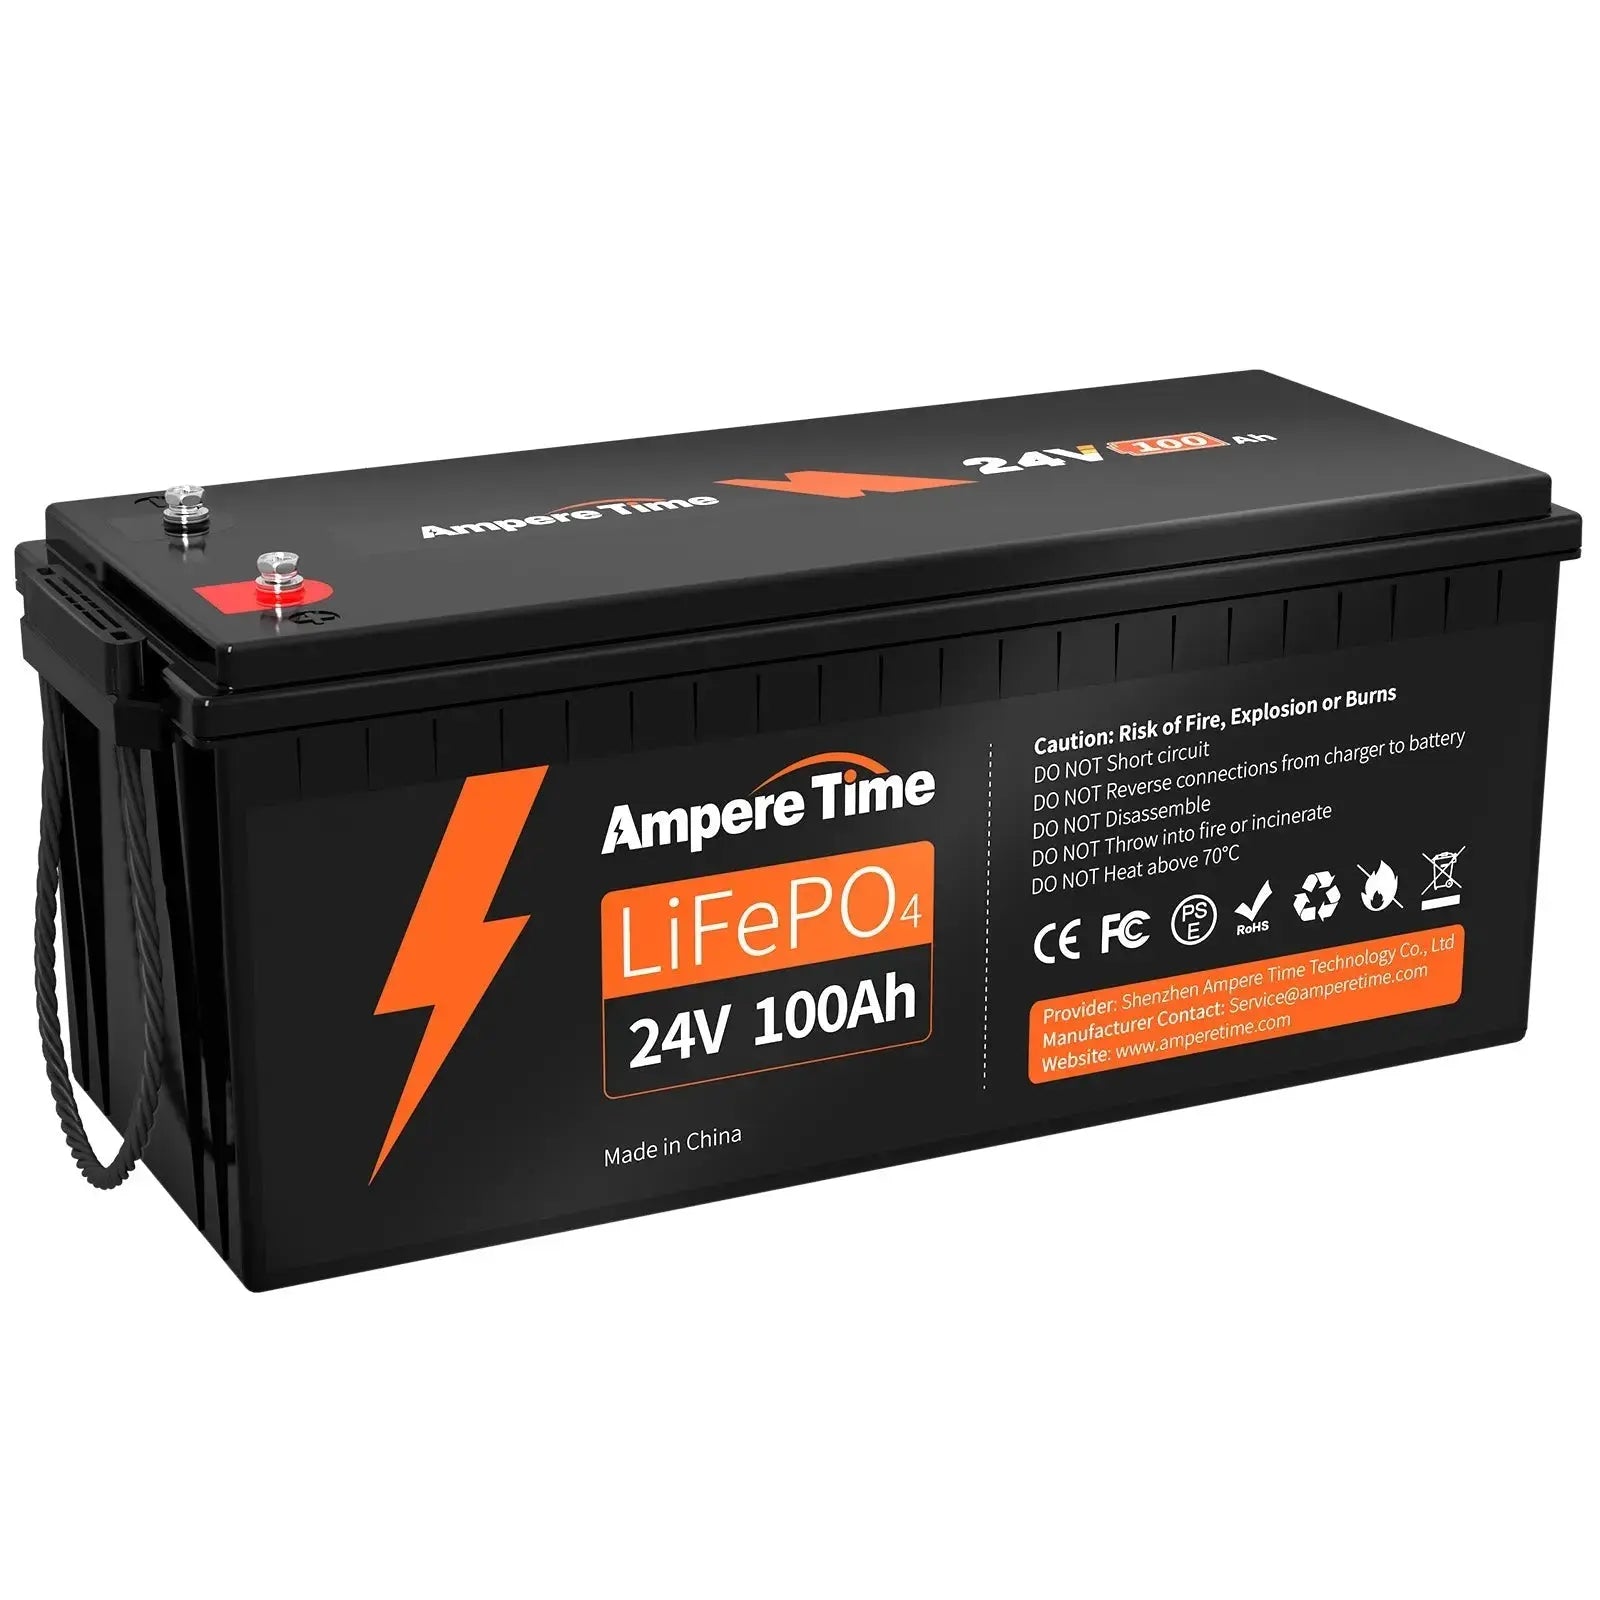 ✅Like New✅ Ampere Time 24V 100Ah, 2560Wh Lithium LiFePO4 Battery & Built in 100A BMS Ampere Time